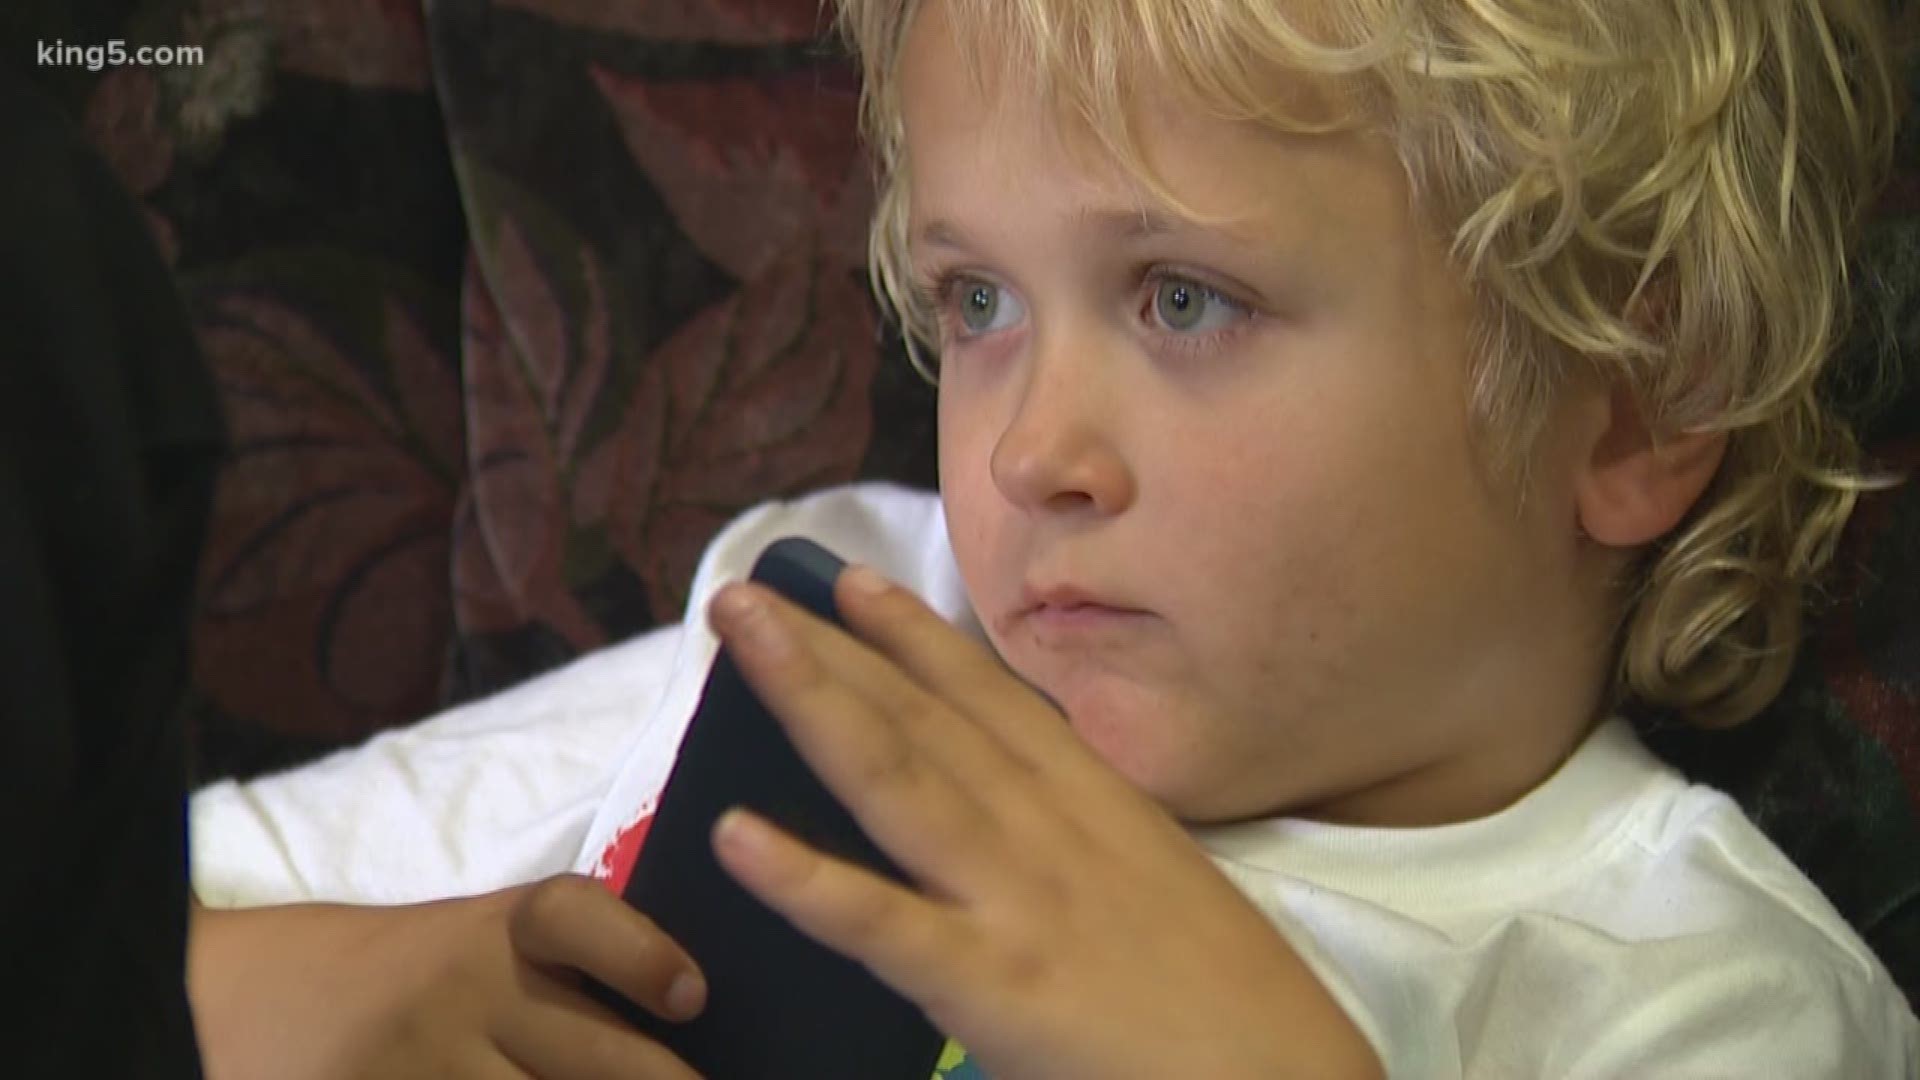 An occupational therapist is accusing Sumas Elementary School staff of unlawfully restraining a 7-year-old deaf boy with autism. KING 5's Susannah Frame reports.